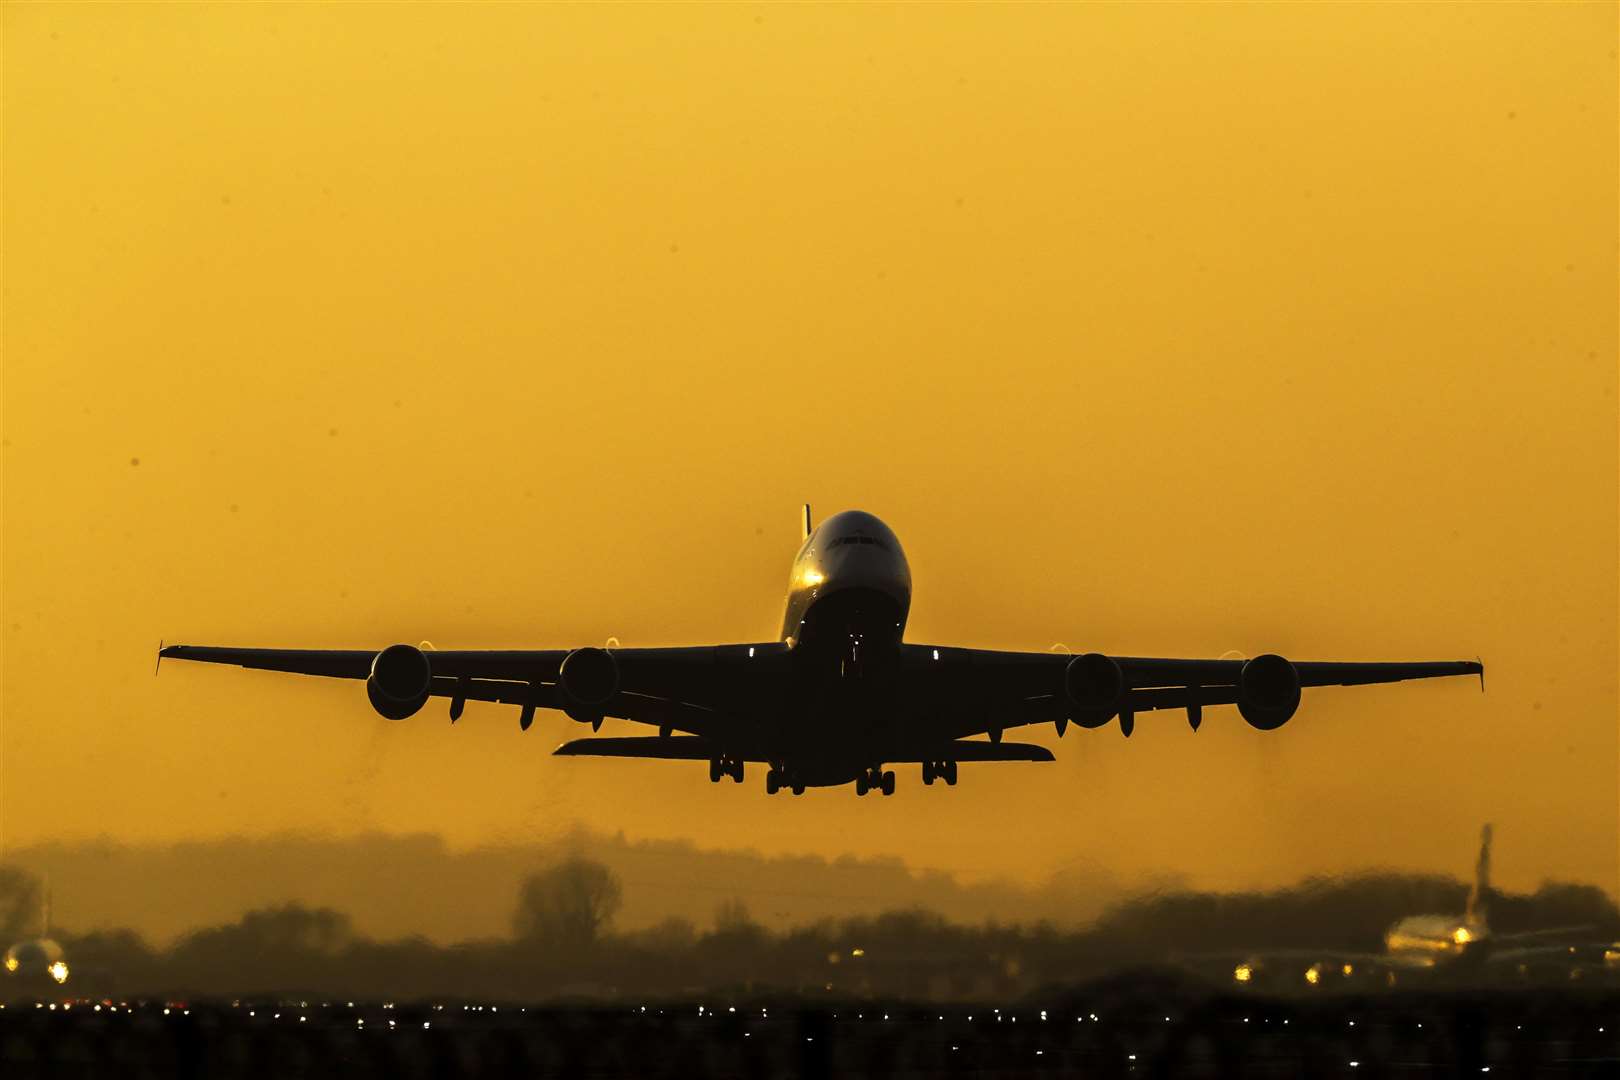 Heathrow’s chief executive is looking to ‘pent-up demand’ being unleashed (Steve Parsons/PA)